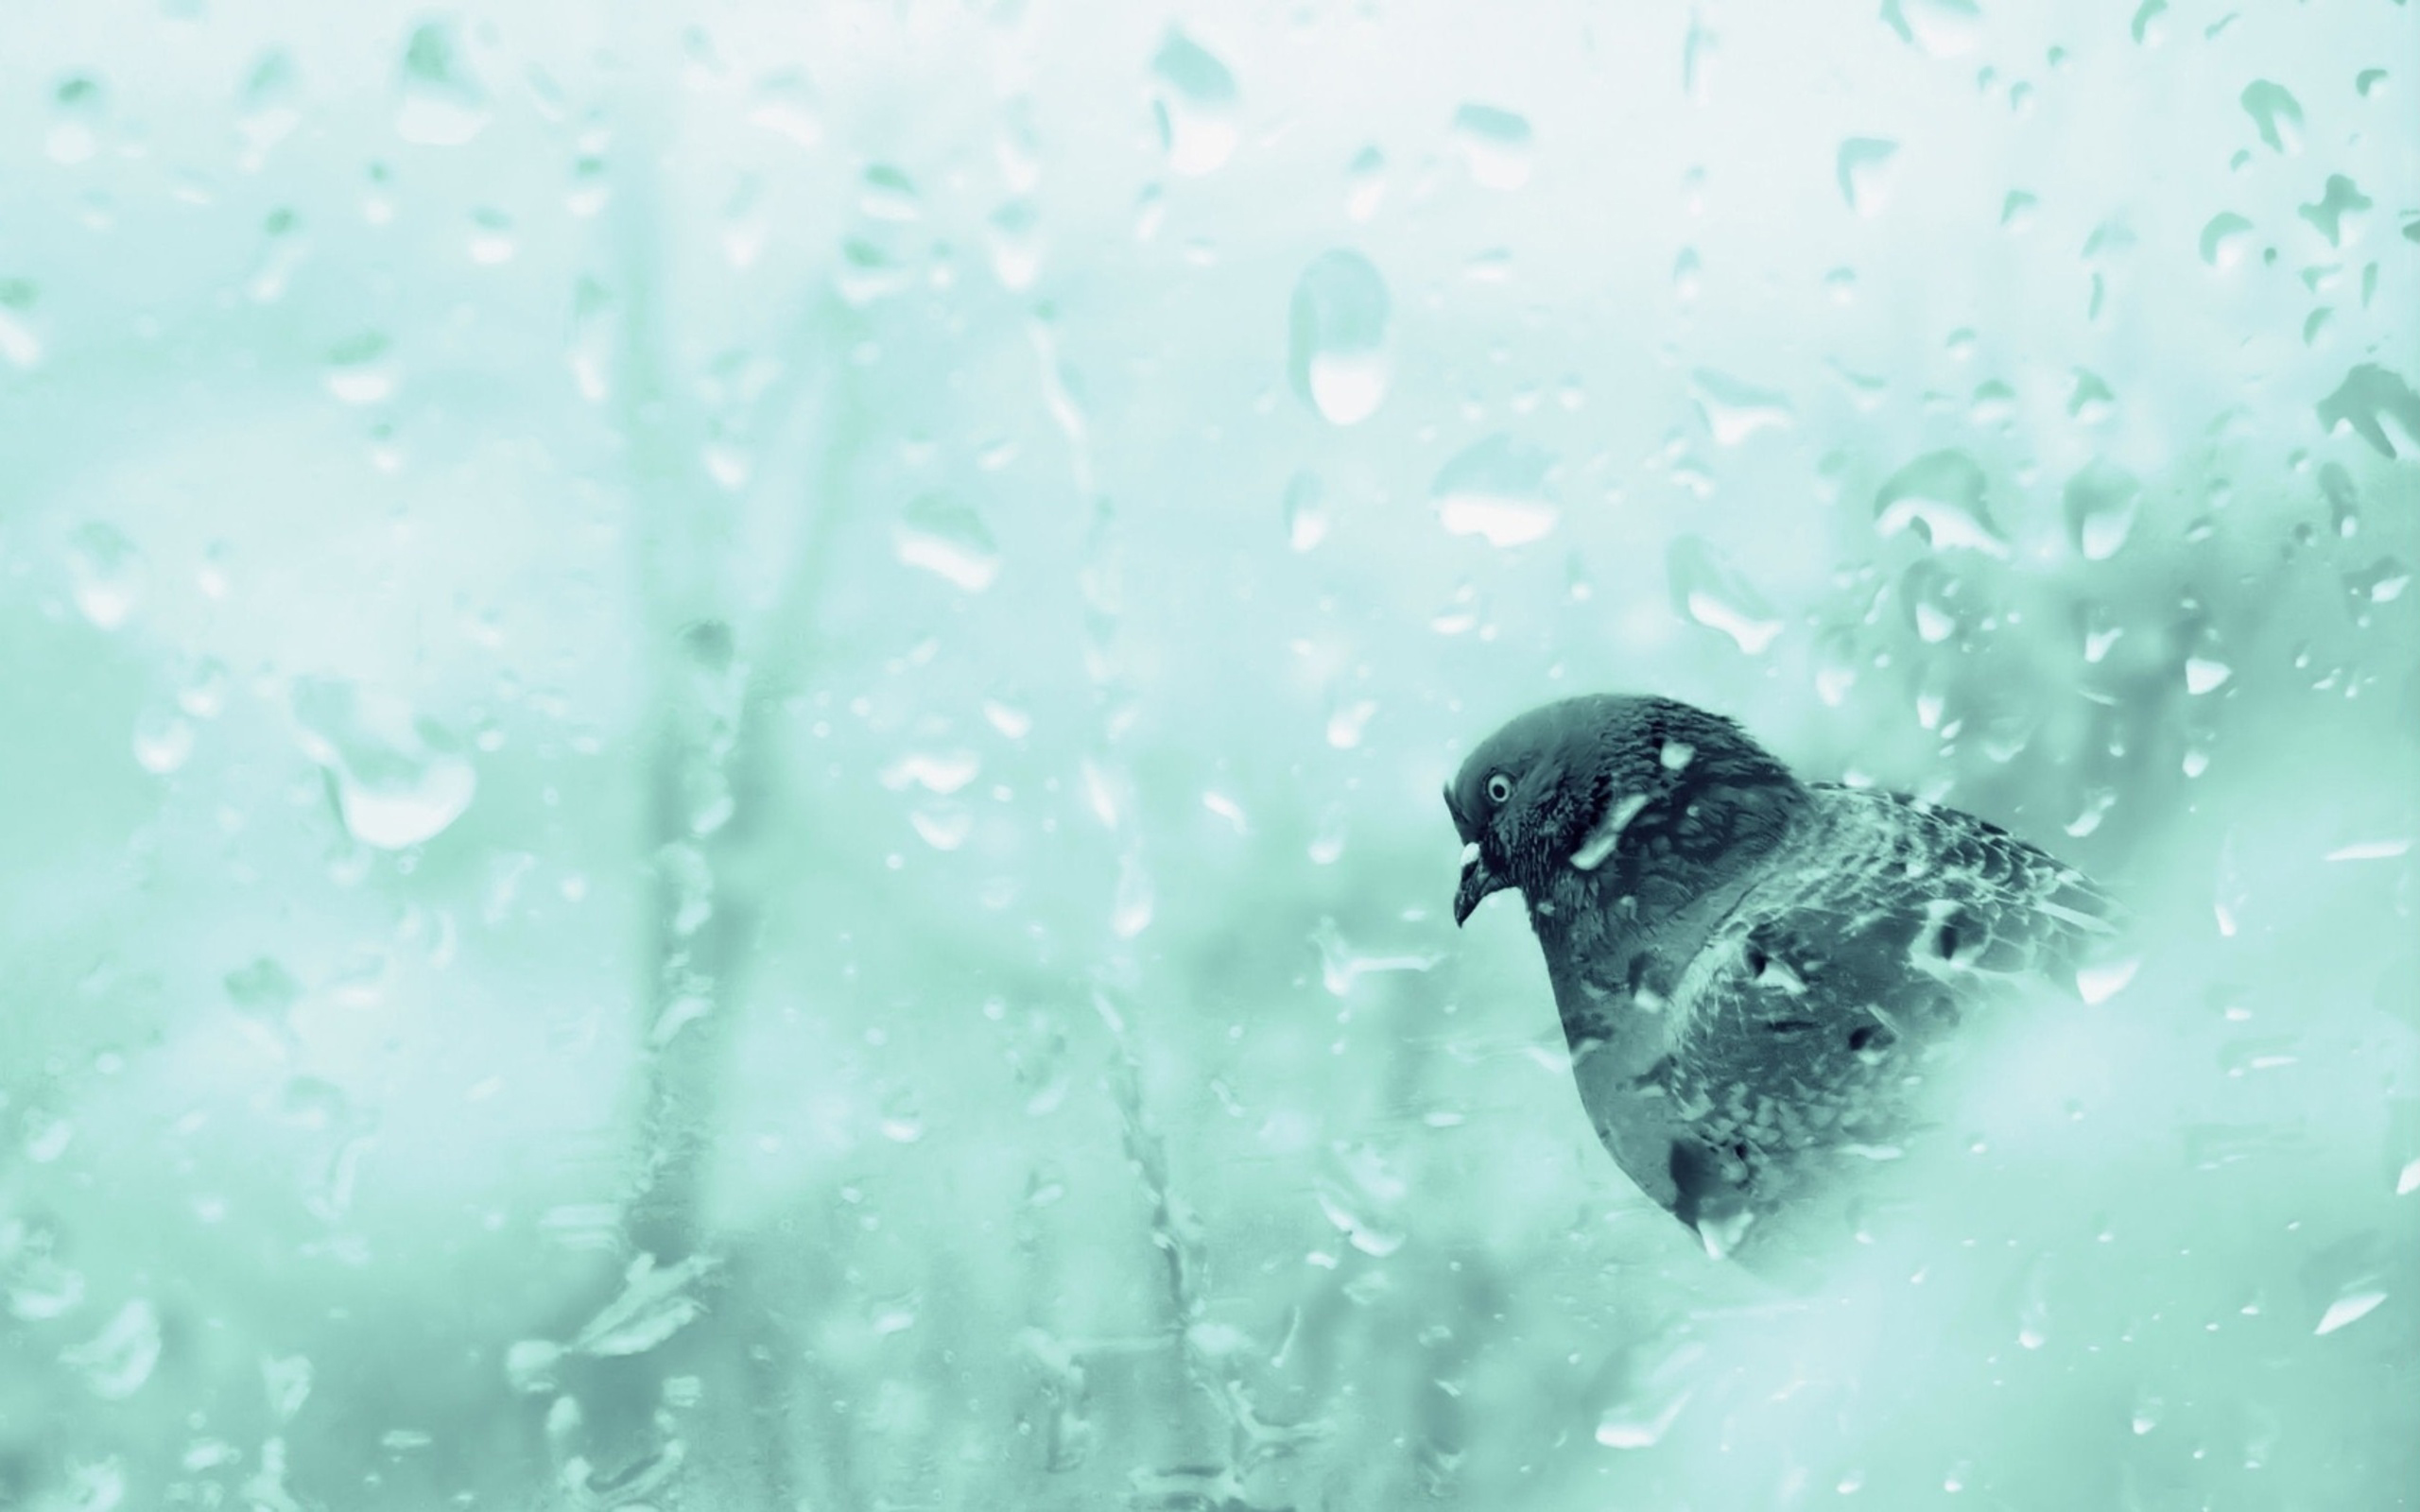 Download Dove In Rainy Day Wallpaper in 2560x1600 Resolution